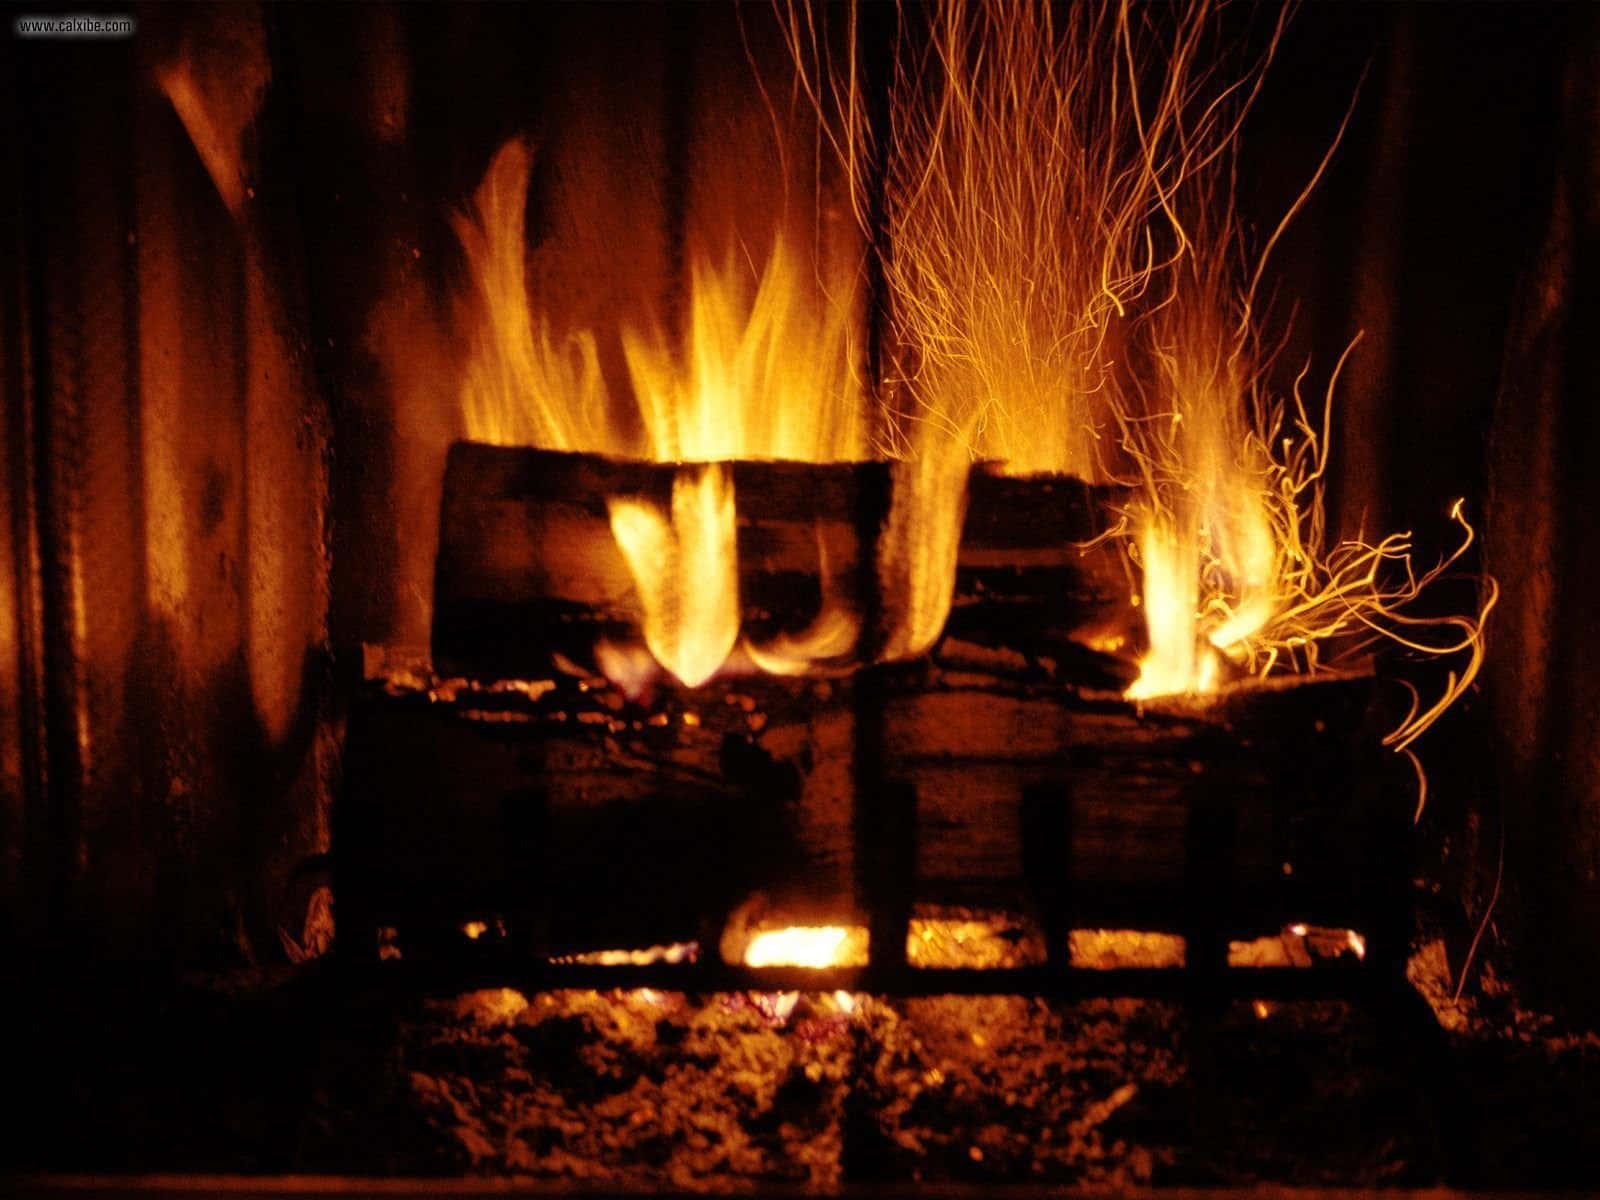 Warm and inviting cozy fire Wallpaper